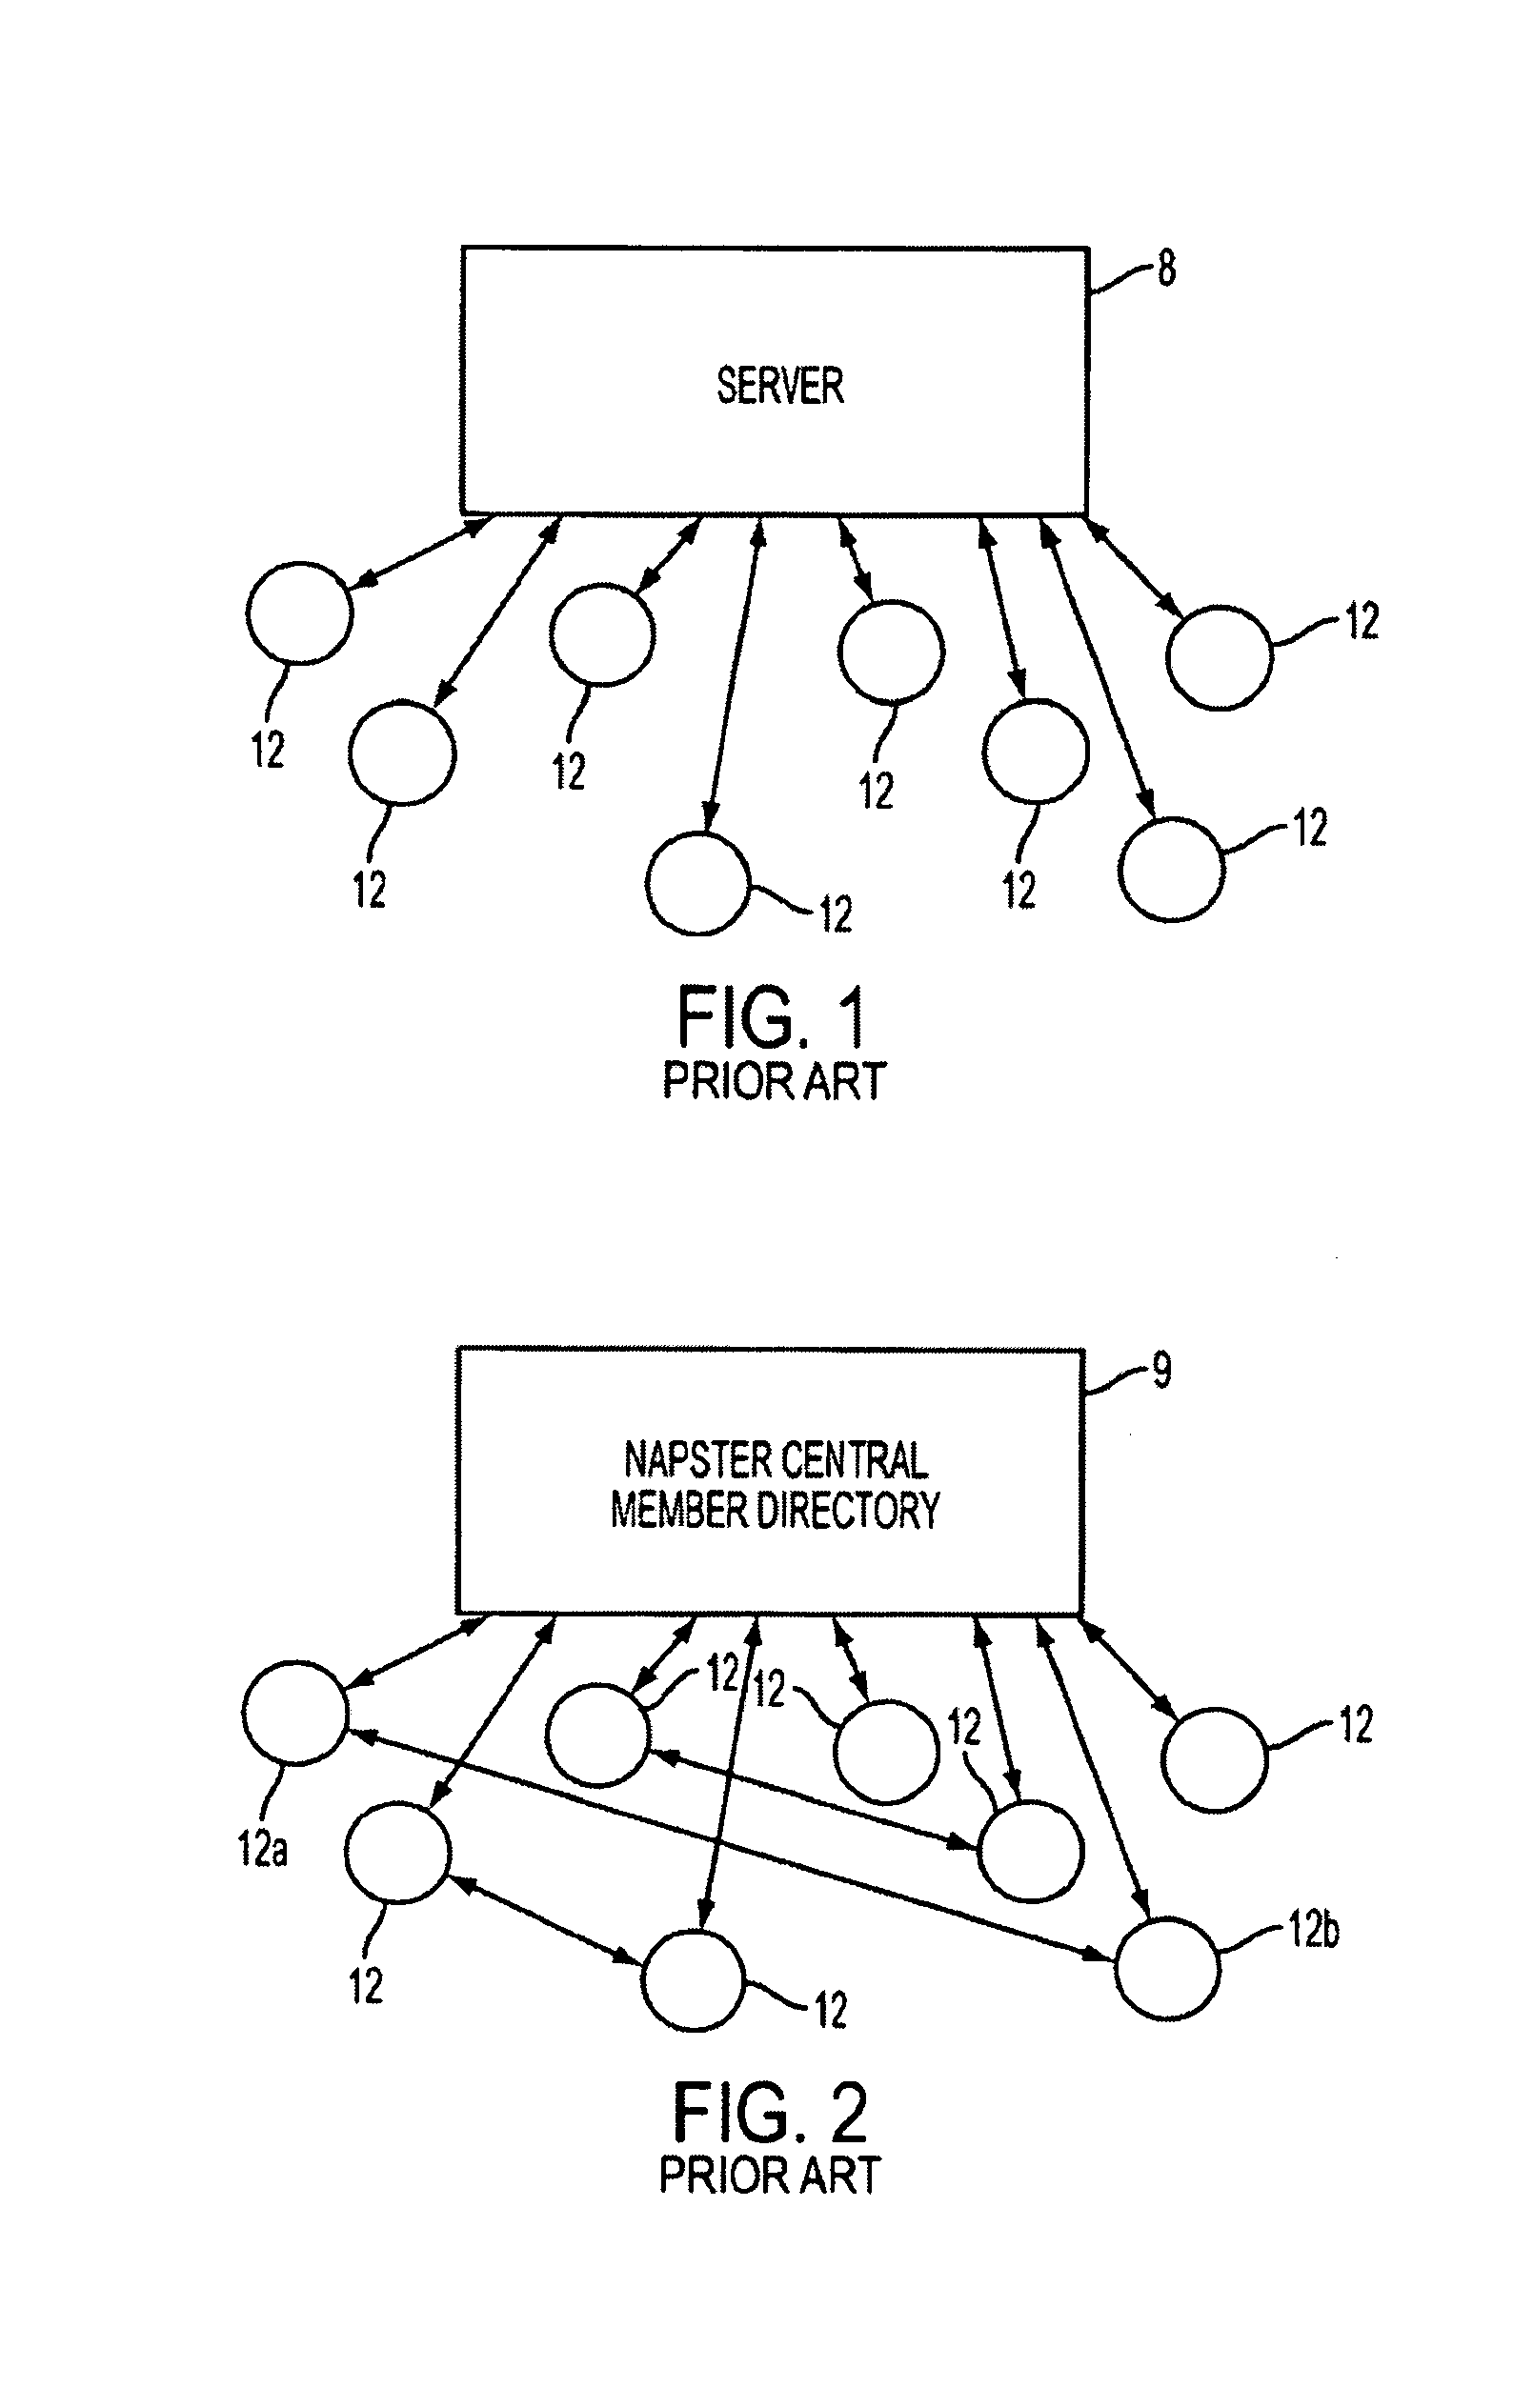 Systems for distributing data over a computer network and methods for arranging nodes for distribution of data over a computer network